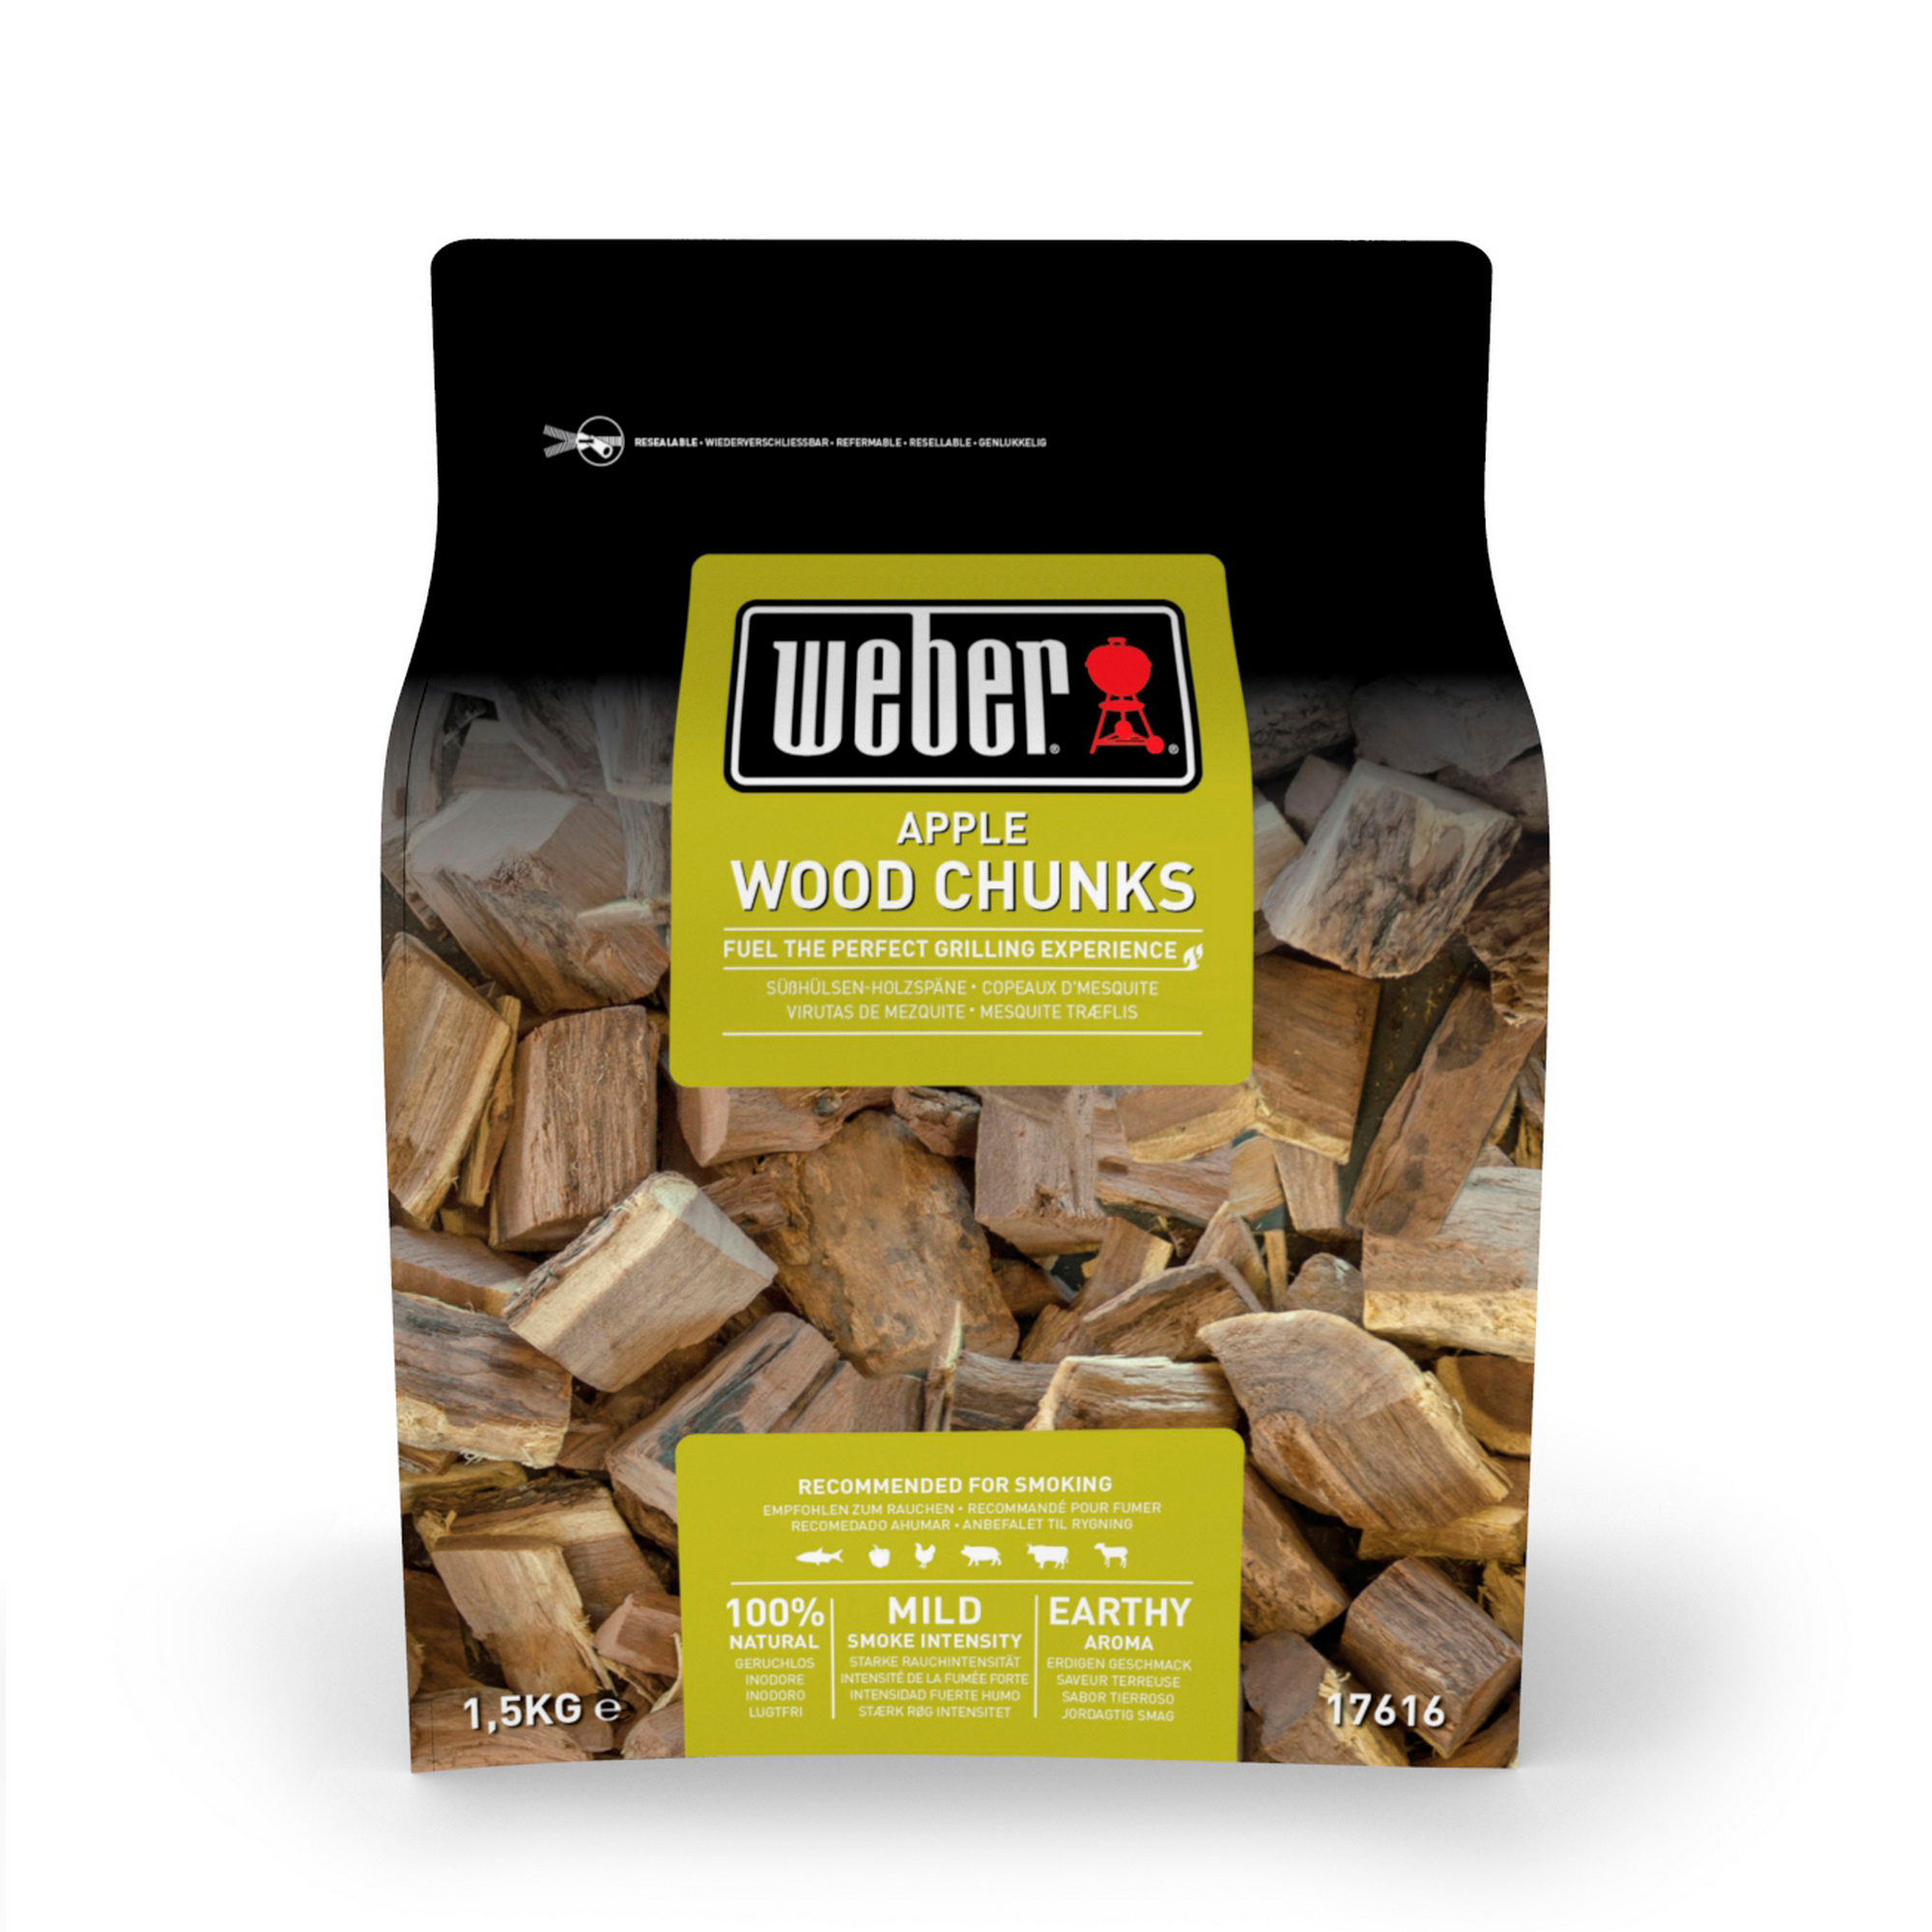 Wood Chunks Holzstücke Apfel 1,5 kg + product picture